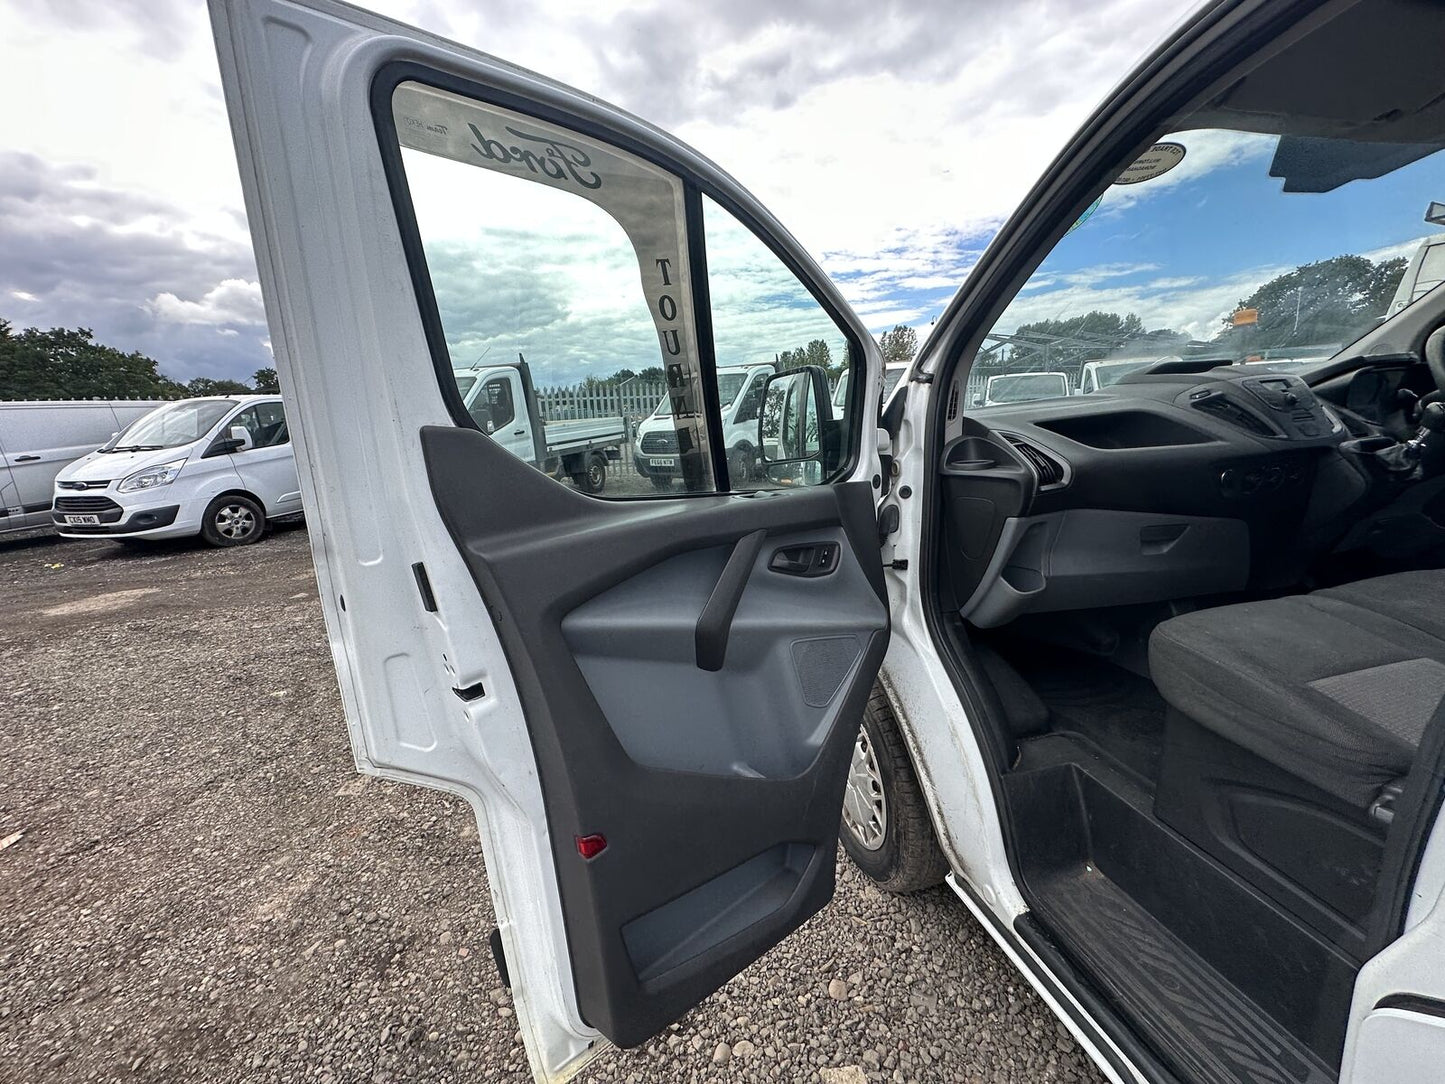 Bid on CARGO CARRIER: 2014 FORD TRANSIT CUSTOM - CLEAN INTERIOR - MOT FEB 2024- Buy &amp; Sell on Auction with EAMA Group